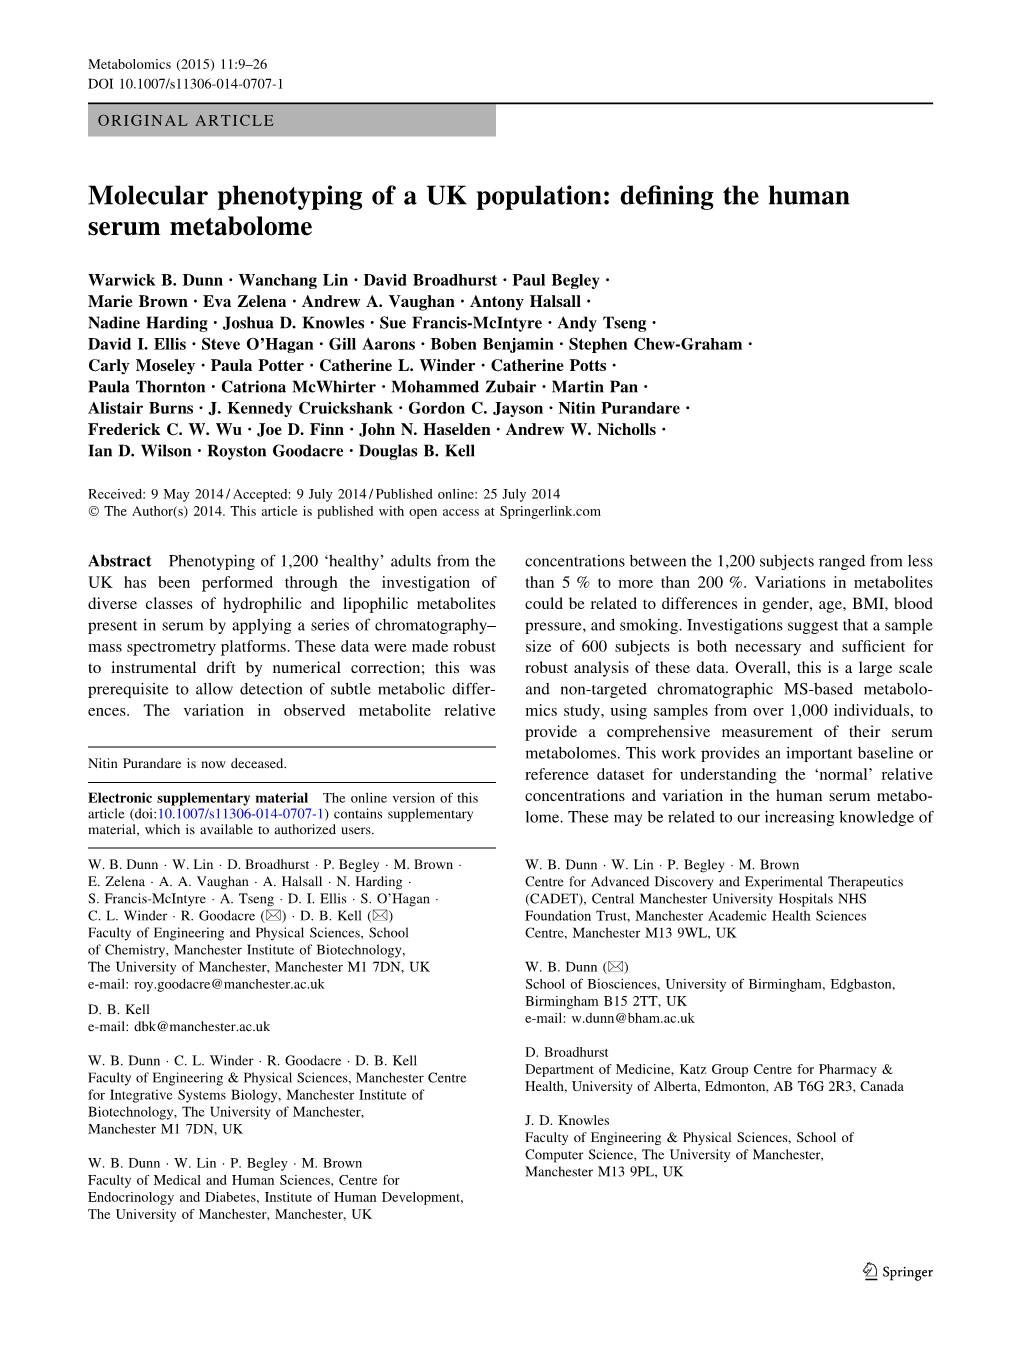 Molecular Phenotyping of a UK Population: Defining the Human